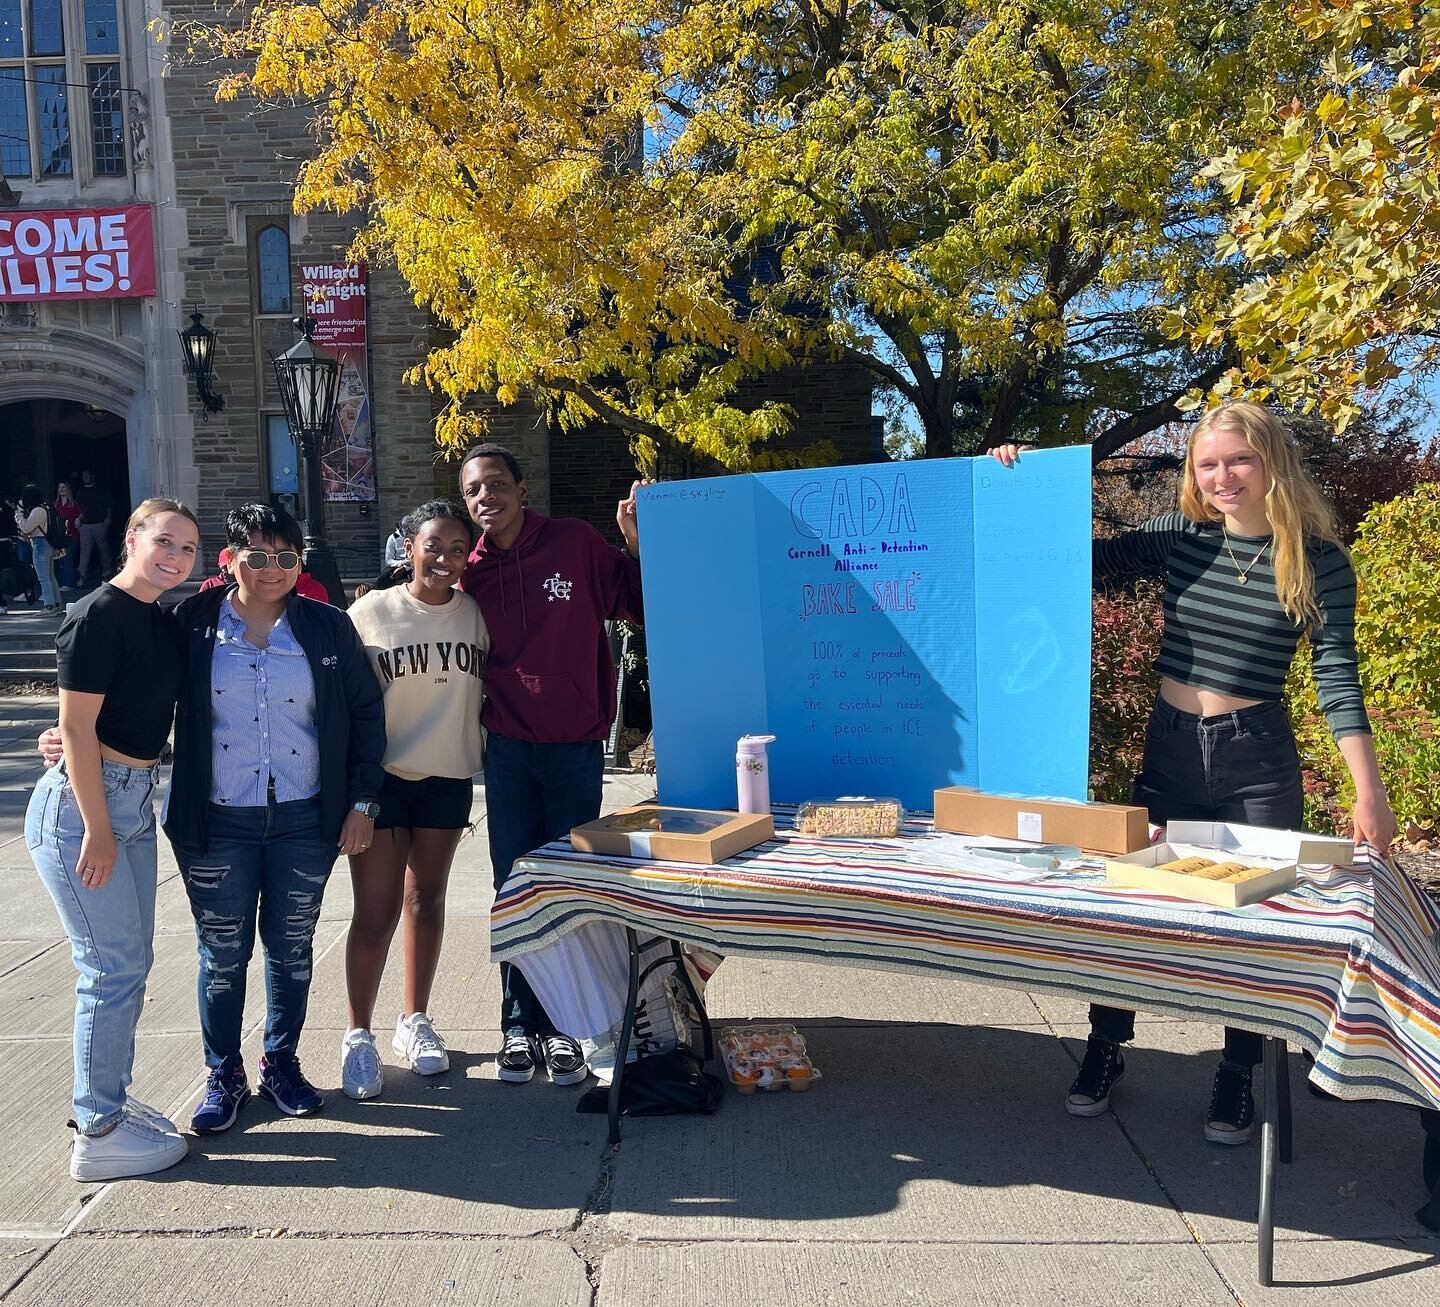 Thank you to everyone who came out to our bake sale today! We raised over $250 in commissary funds to support the care needs of people at the Buffalo Federal Immigration Detention Facility. 

Stay tuned for our next fundraiser!